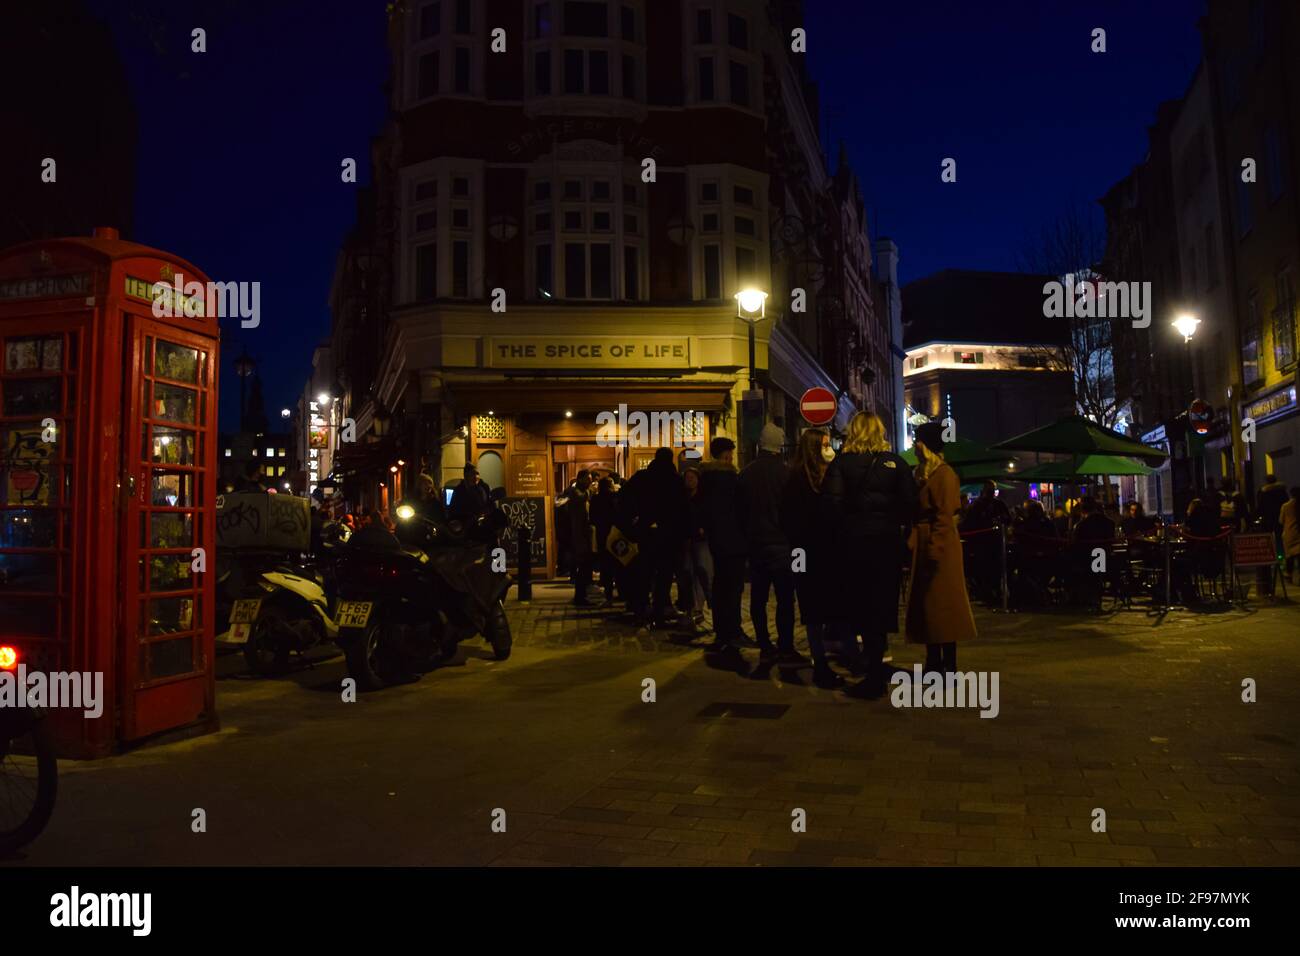 London, United Kingdom. 16th April 2021. A queue outside The Spice Of Life pub in Soho. Crowds of people packed the bars and restaurants in Soho, Central London, on the first Friday since lockdown rules were relaxed. Stock Photo